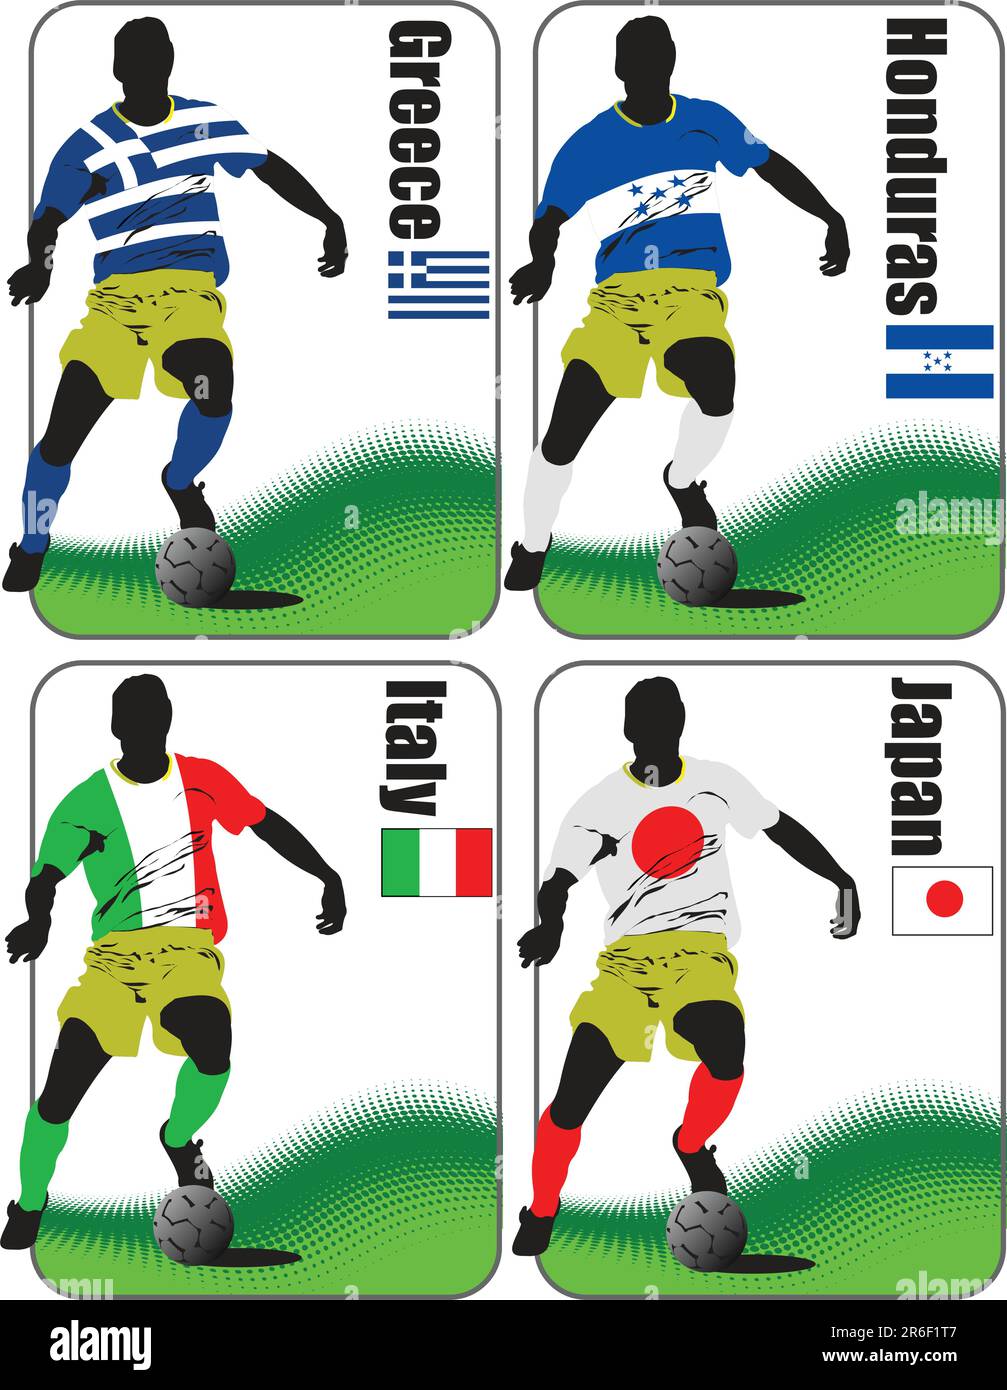 Finals of the World Soccer Cup 2010. 32 teams in T-shirts of the national flags. Greece, Honduras, Italy, Japan Stock Vector